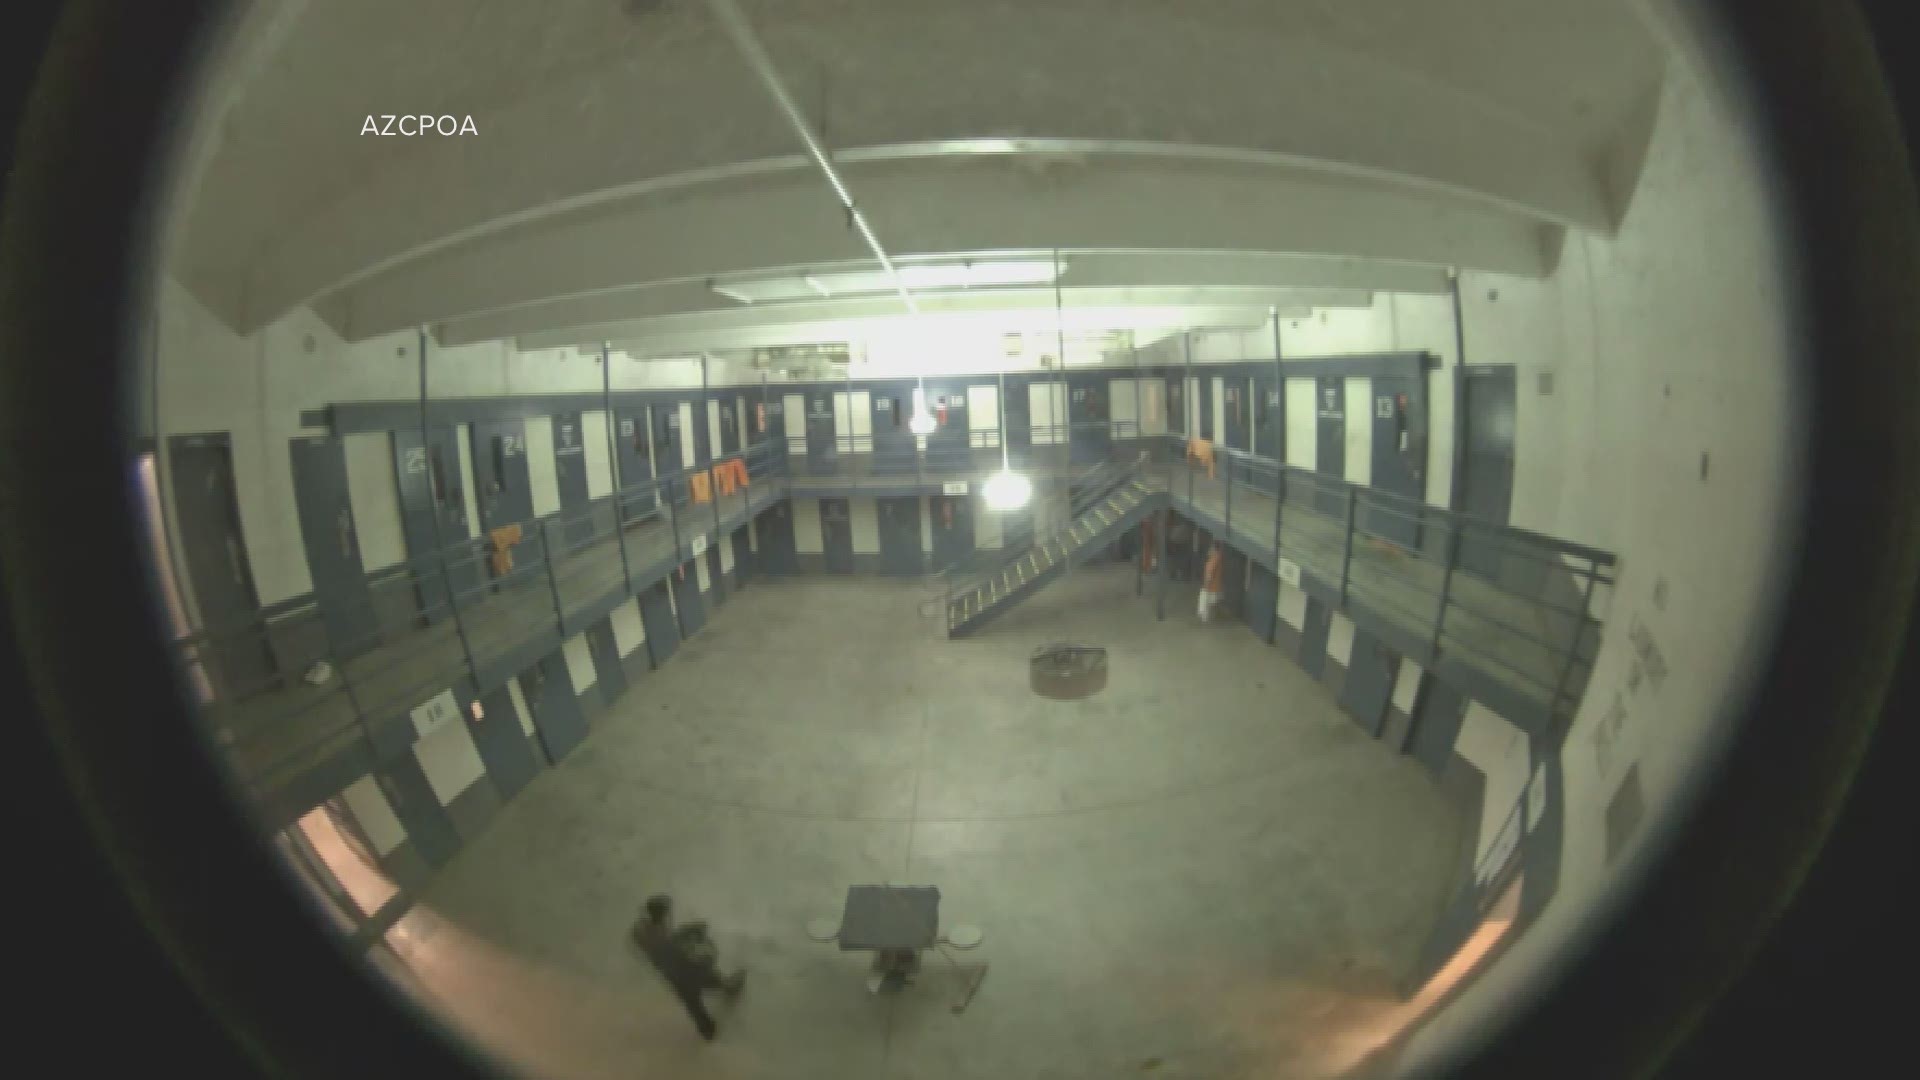 In surveillance video released by AZCPOA inmates at Lewis Prison in Buckeye, AZ can be seen attacking two officers. At first, two inmates are seen hitting officers then seven inmates join in. Moments later all inmates disappear out of the frame, only to all rush back into the frame and up the stairs.